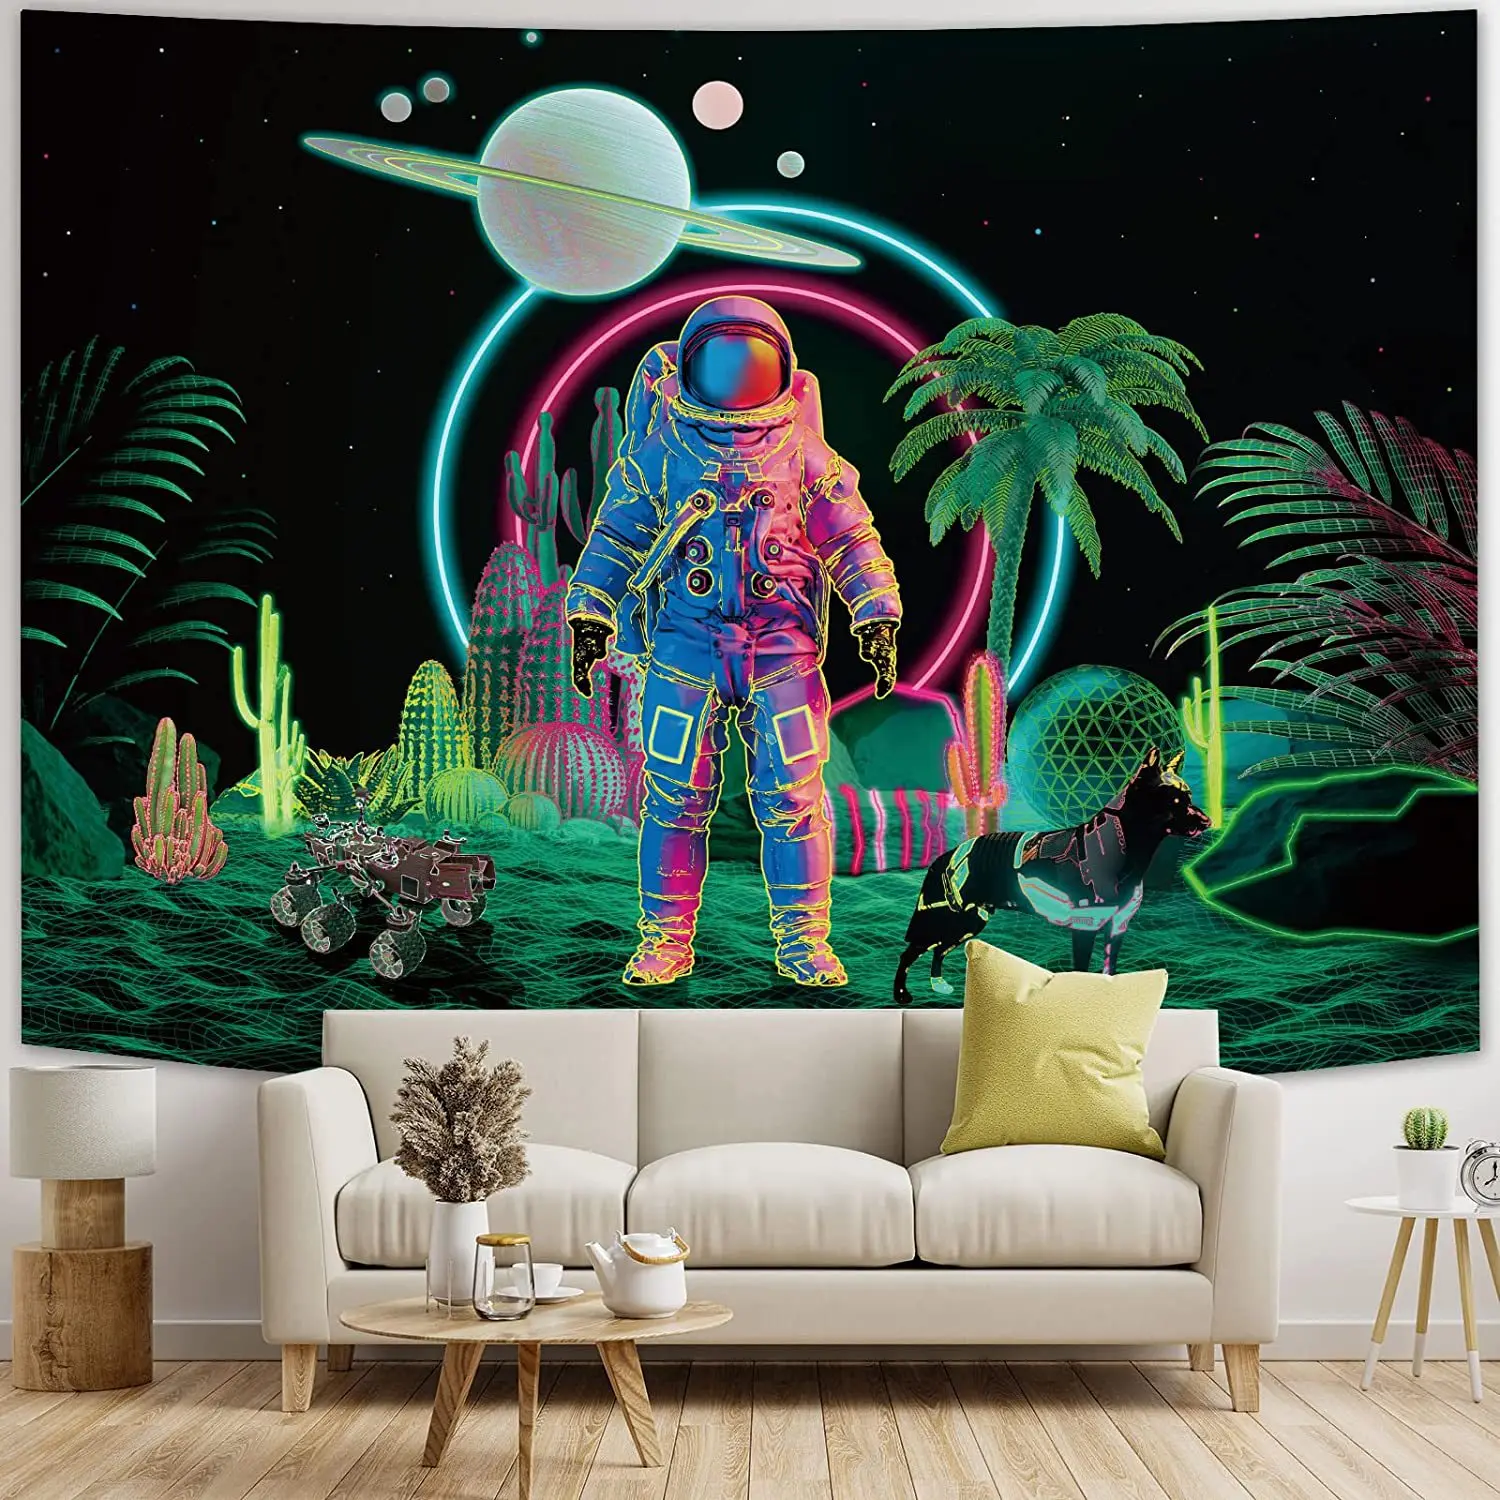 

Astronaut Tapestry Dream Plant Wall Hanging Tapiz Pared Home Art Decor Wall Hanging Aesthetic Galaxy Space Room Tapisserie Mural